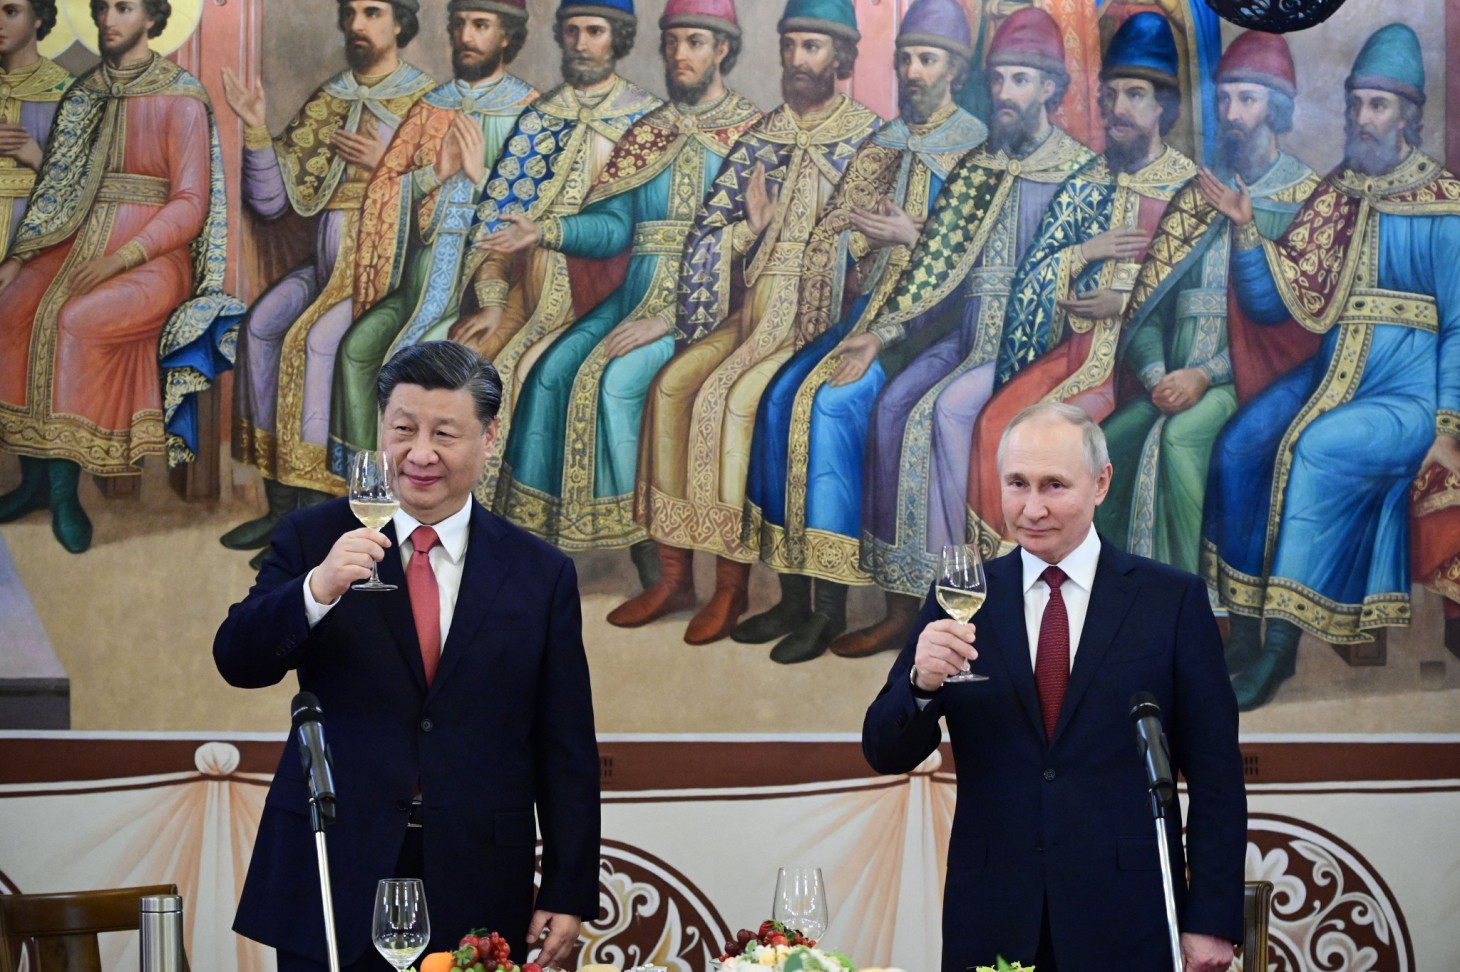 Putin and Xi release statement backing IOC stance as plans for rival events continue